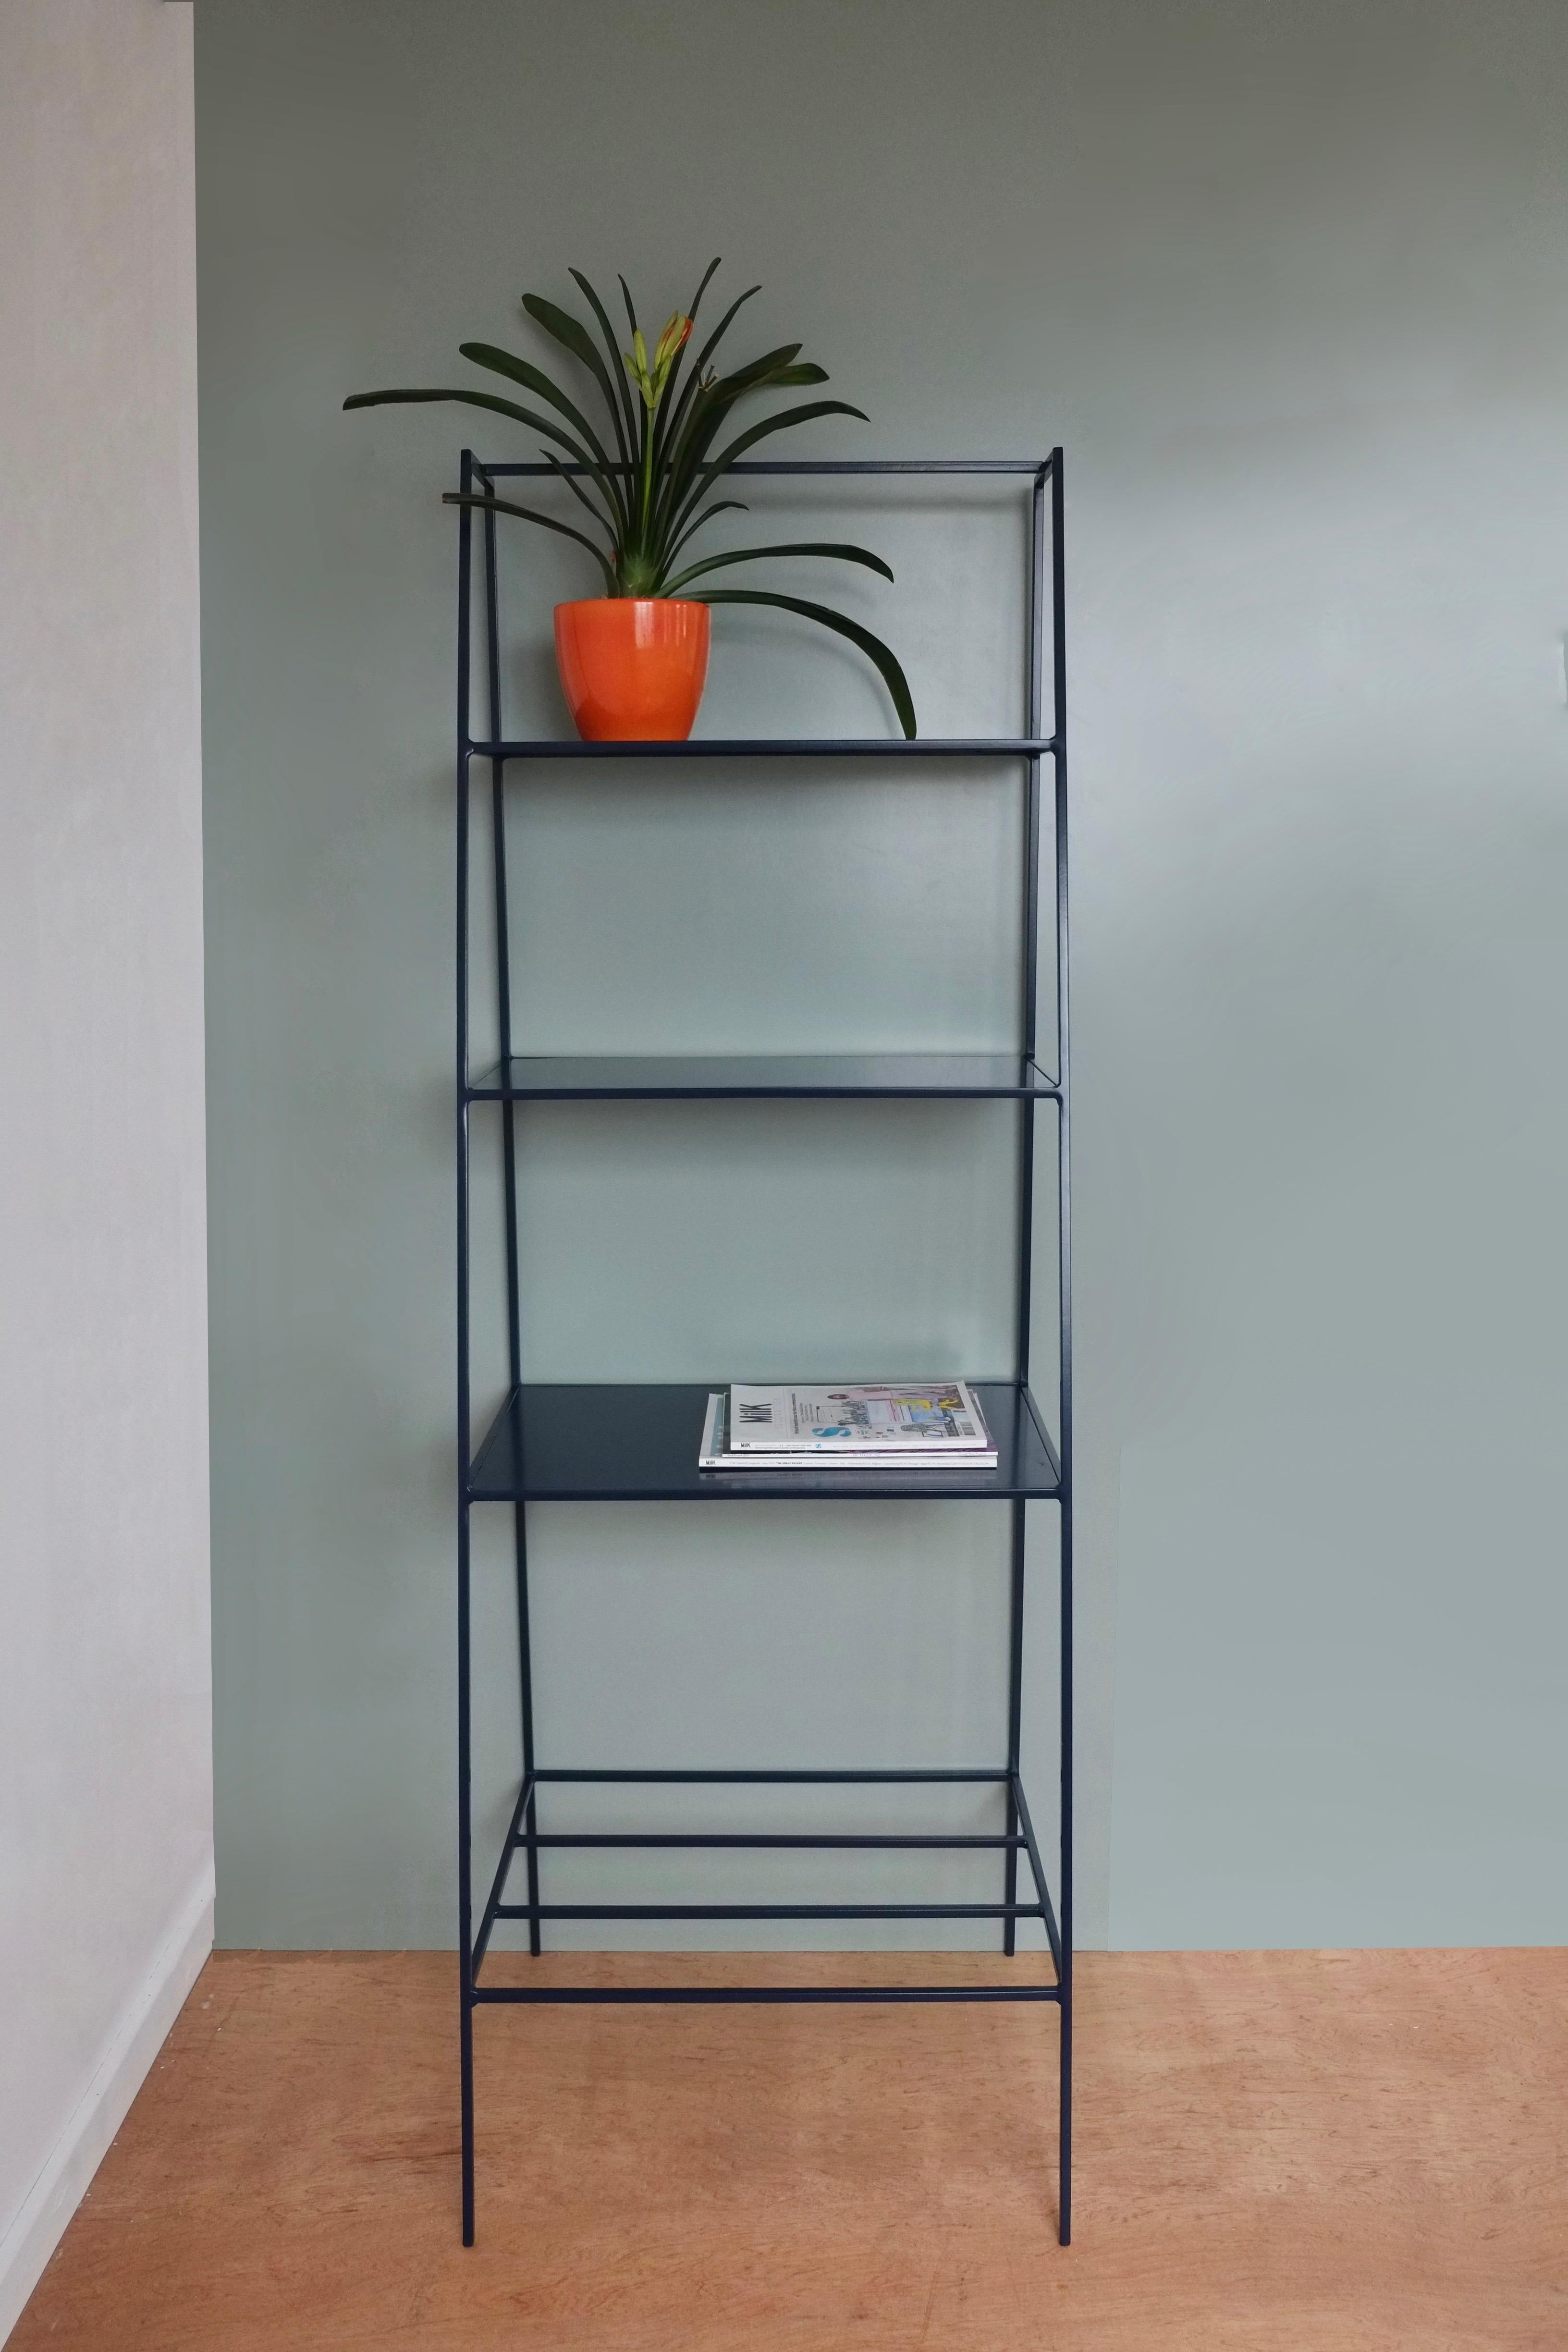 Modern freestanding shelves unit for books and plants. The shelves are designed to look delicate and airy but strong. The straight back design sits neatly against a wall or can be free standing to create a room division. The clean lines look great